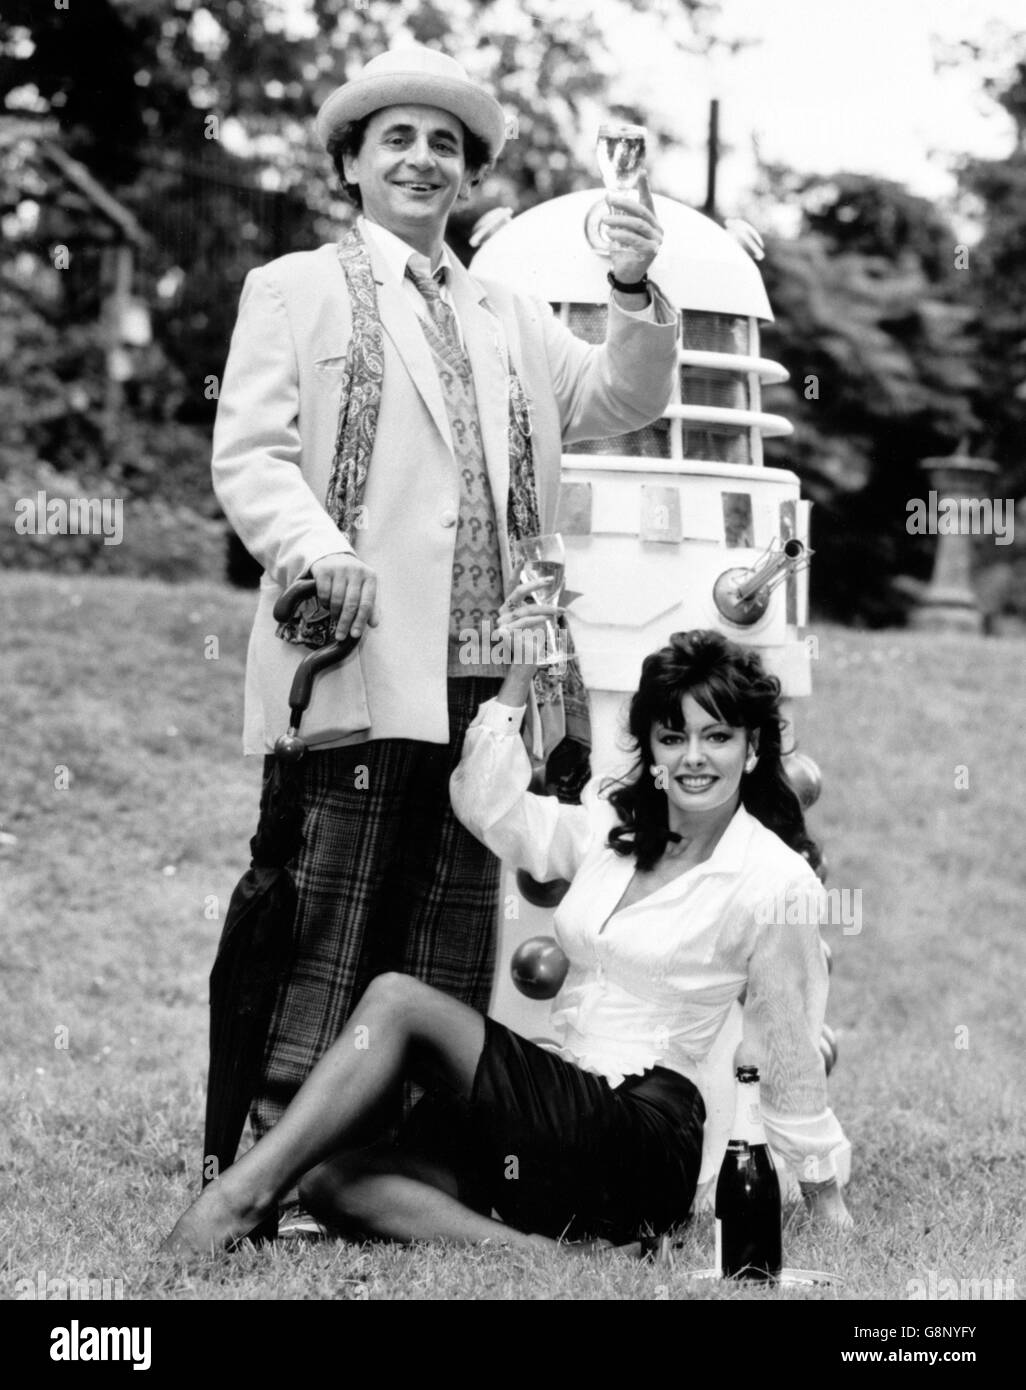 Eccentric Time Lord Doctor Who (played by actor Sylvester McCoy) toasts the television's programme's 25th birthday with 'Allo 'Allo! favourite waitress Yvette (actress Vicki Michelle), watched over closely by one of the Doctor's oldest enemies, a Dalek. Stock Photo